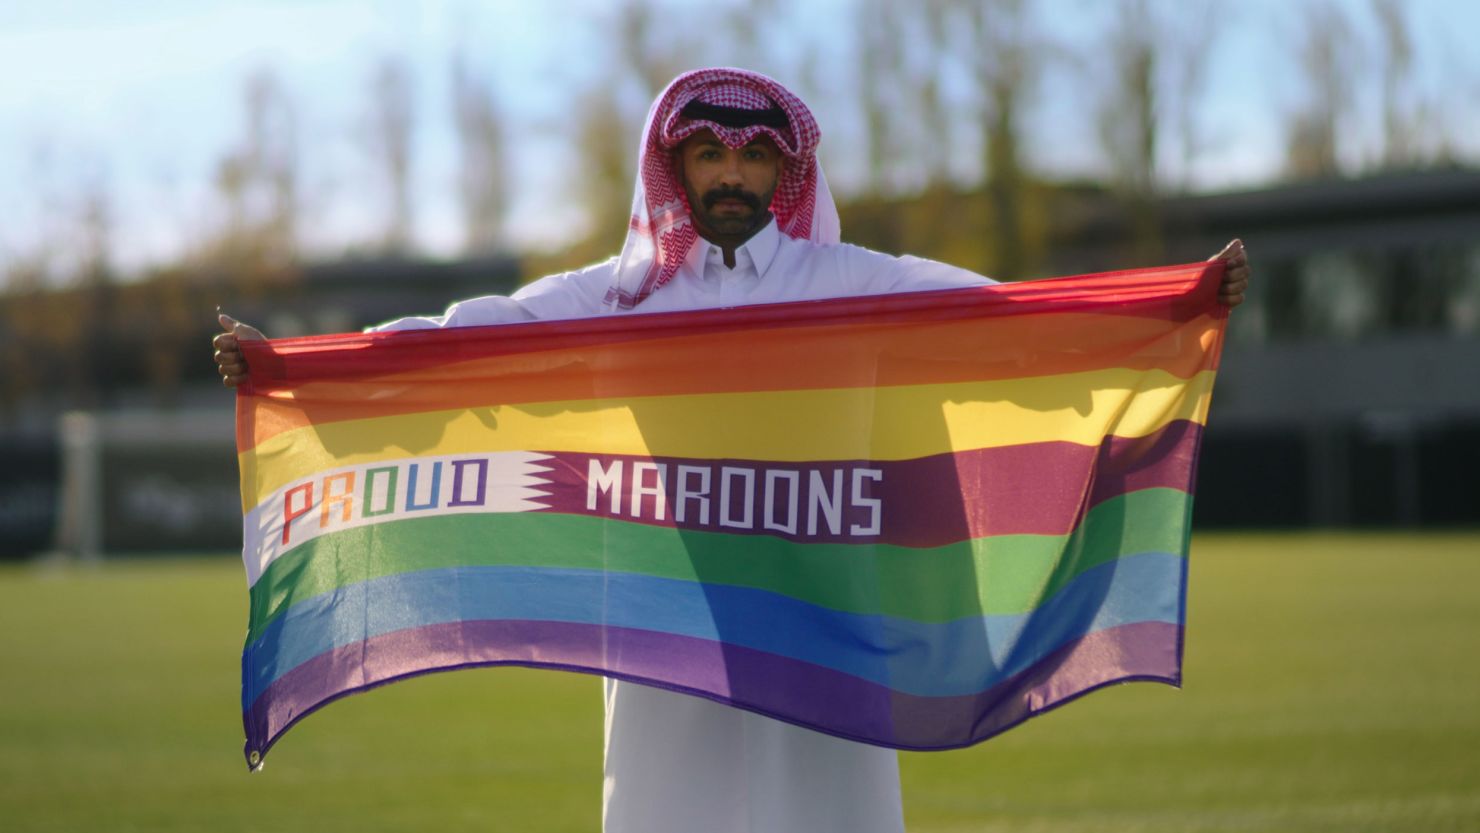 Dr. Nasser "Nas" Mohamed created a group for LGBTQ Qatari football fans, the Proud Maroons, to raise awareness about persecution, garner support from allies and increase the community's visibility.